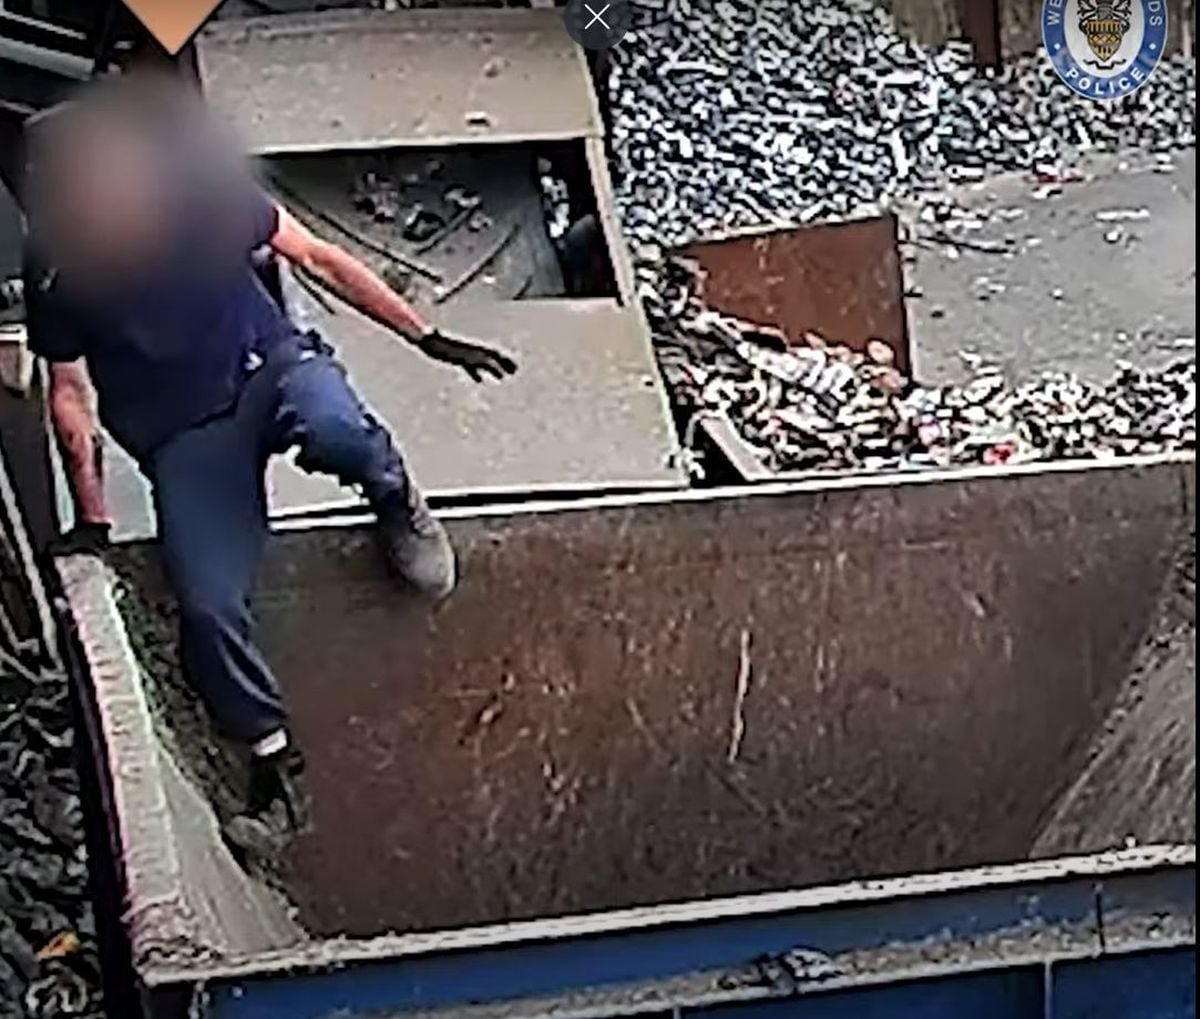 CCTV showed workers jumping up and down on metal in a hopper to clear blockages. Image: West Midlands Police